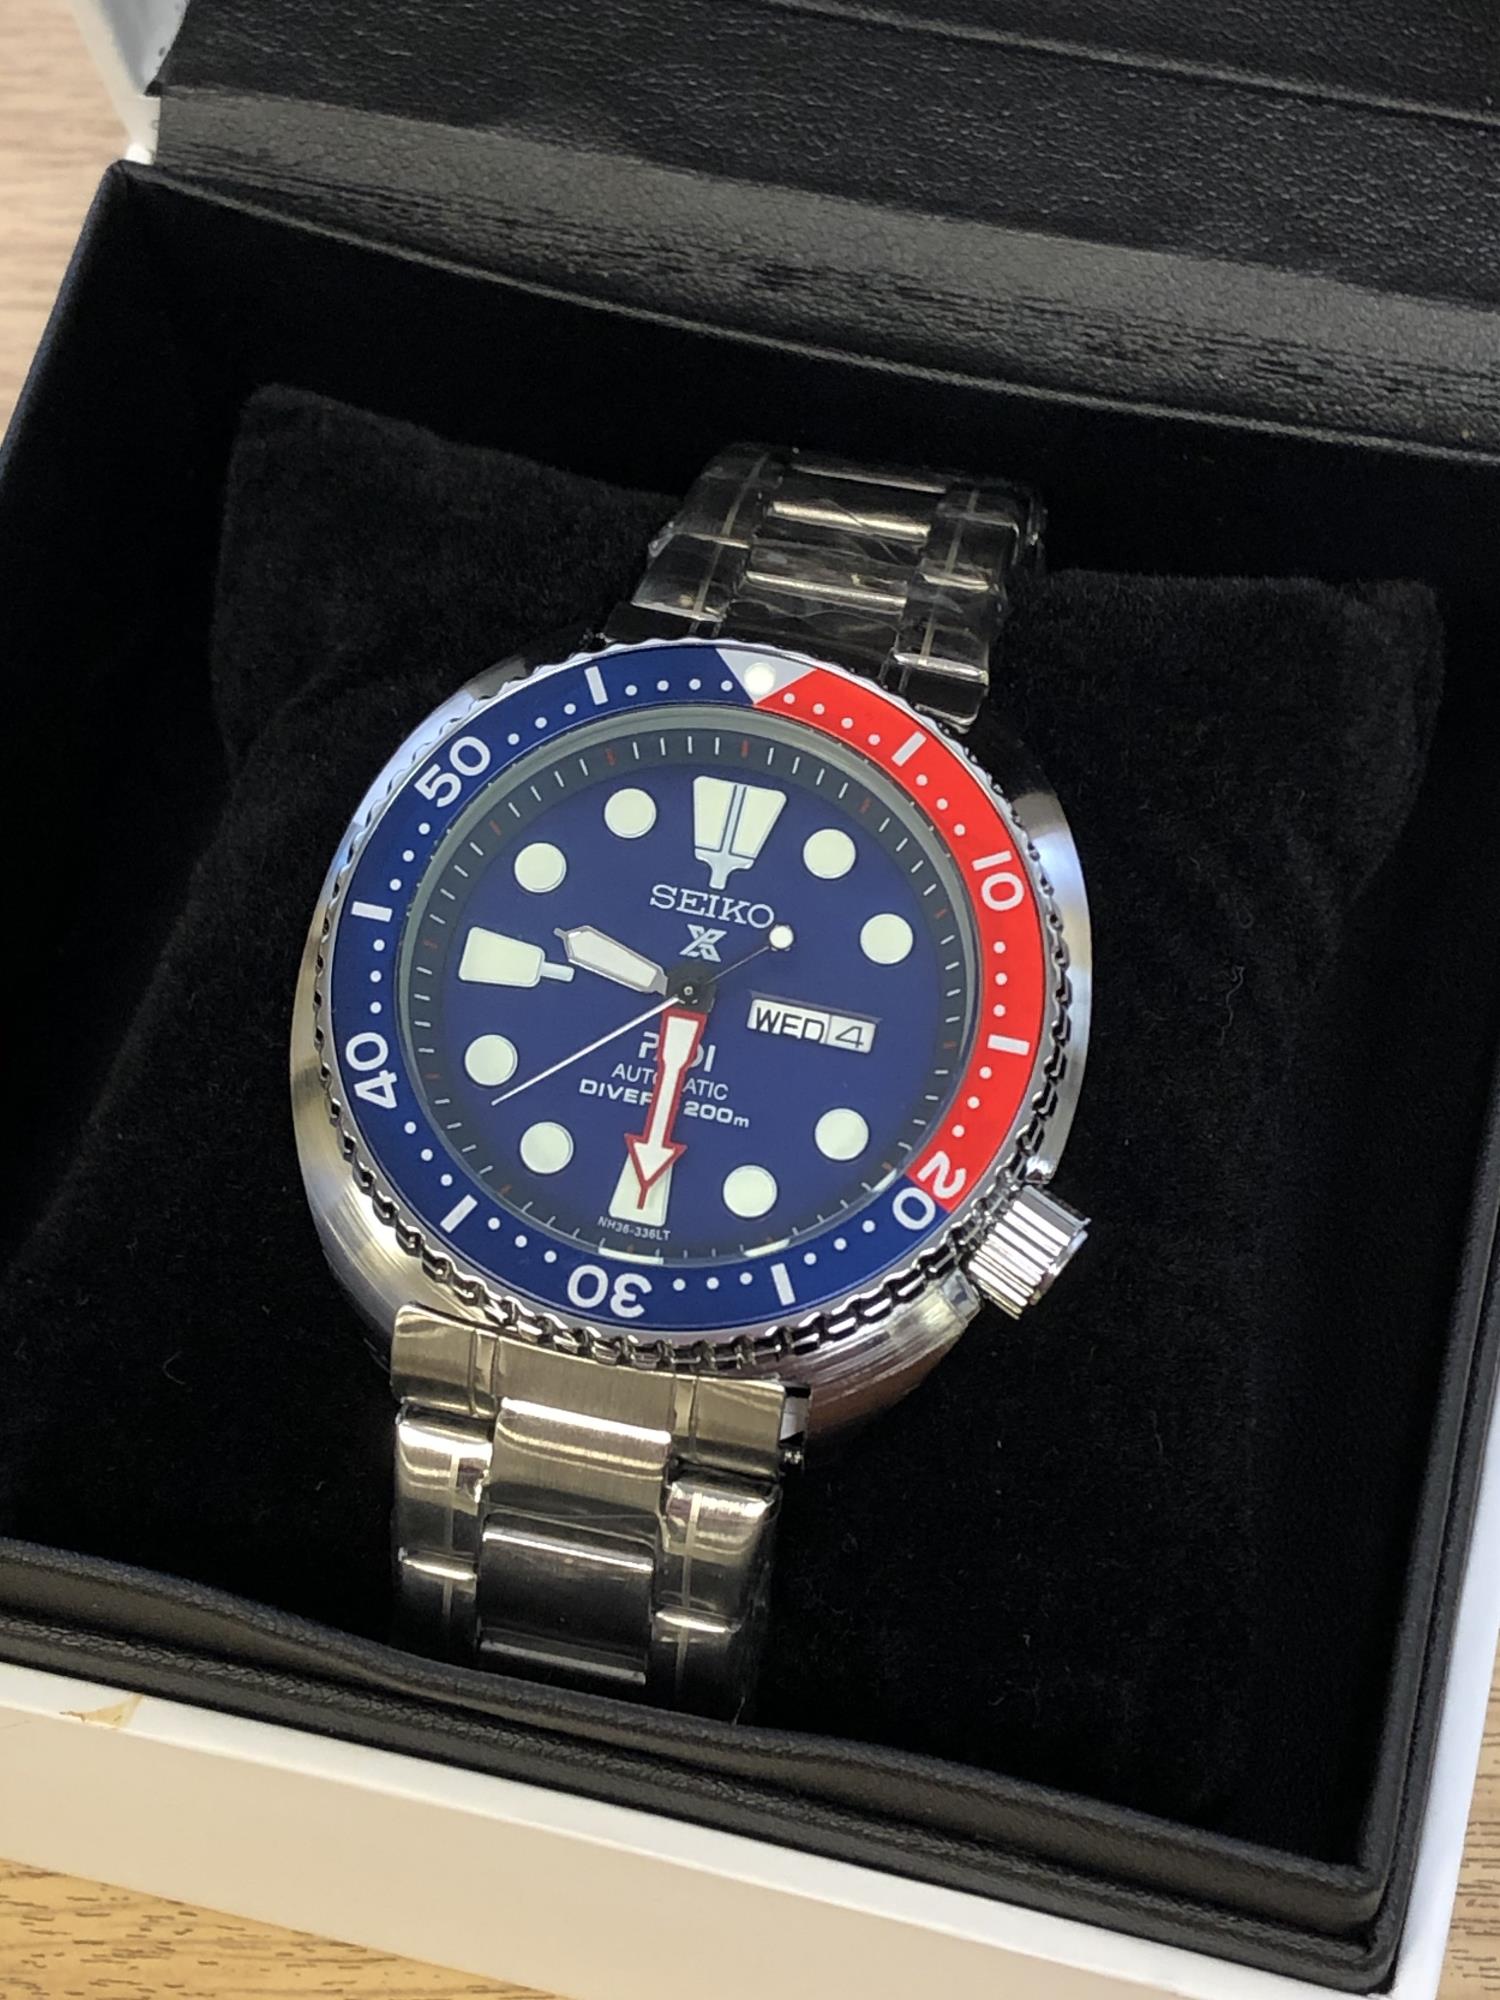 *** Withdrawn *** A gent's stainless steel Seiko PADI Turtle automatic diver's watch in box